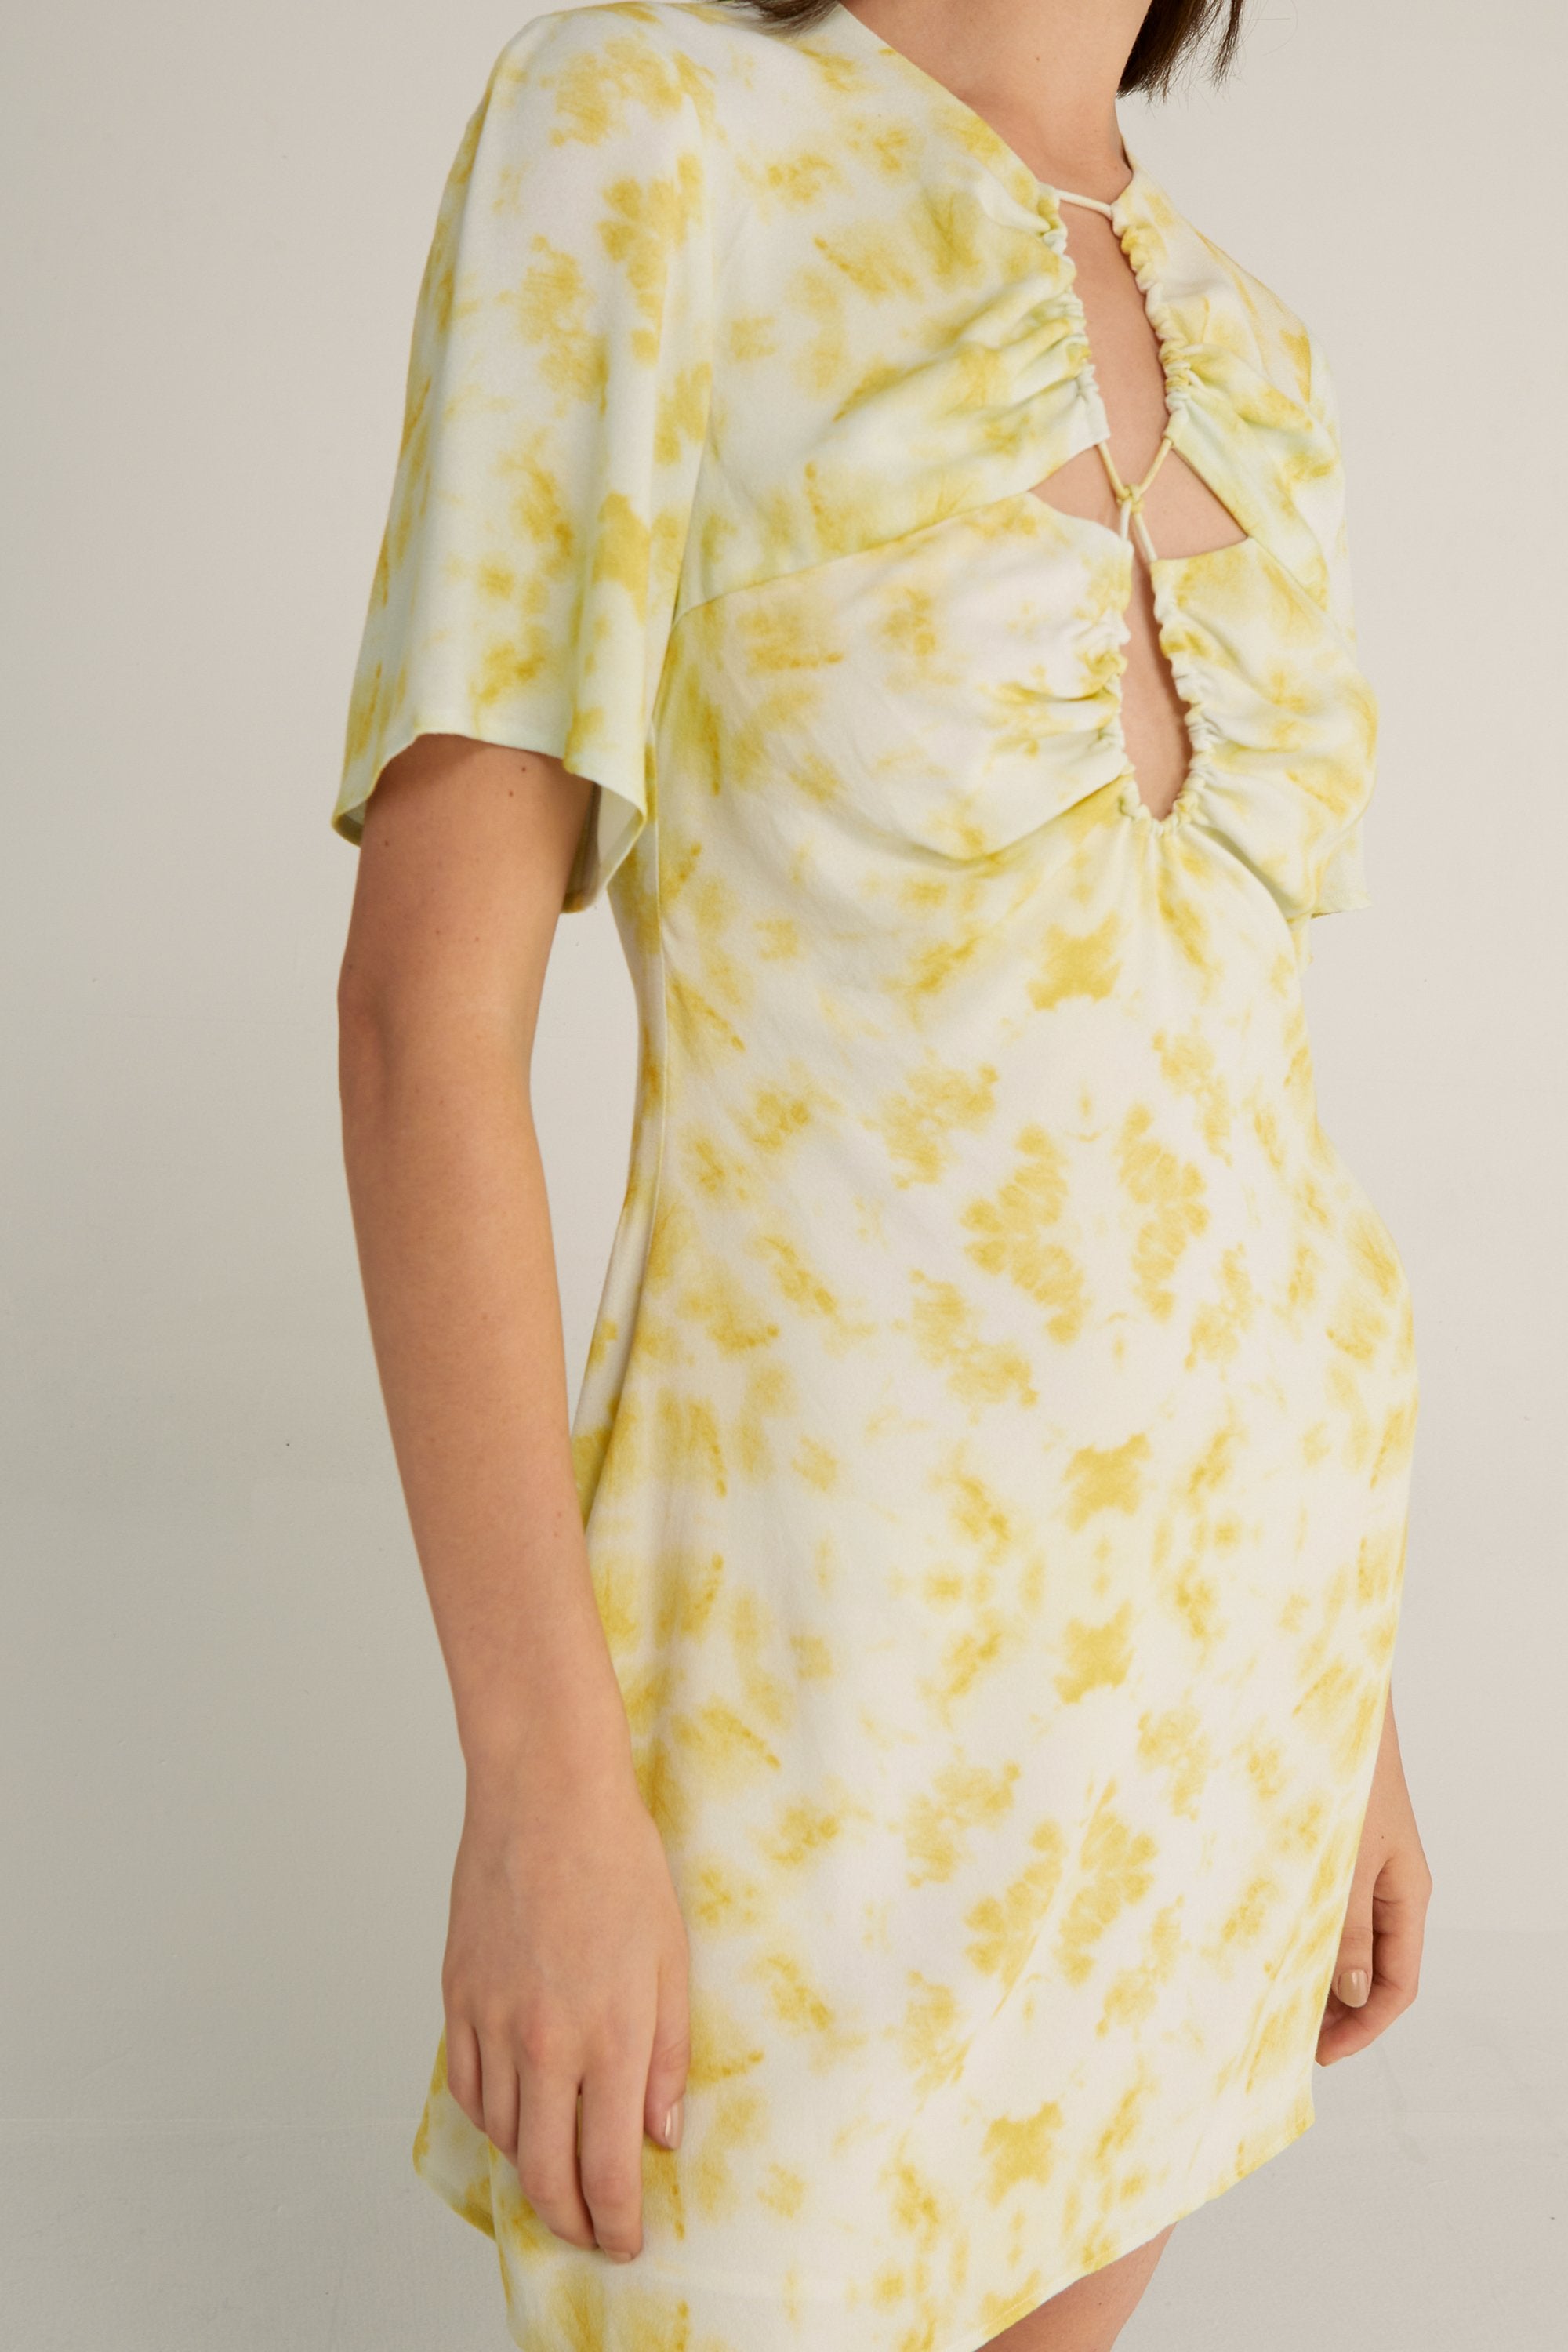 Third Form Ring Out Tee Dress - Tie-Die Yellow